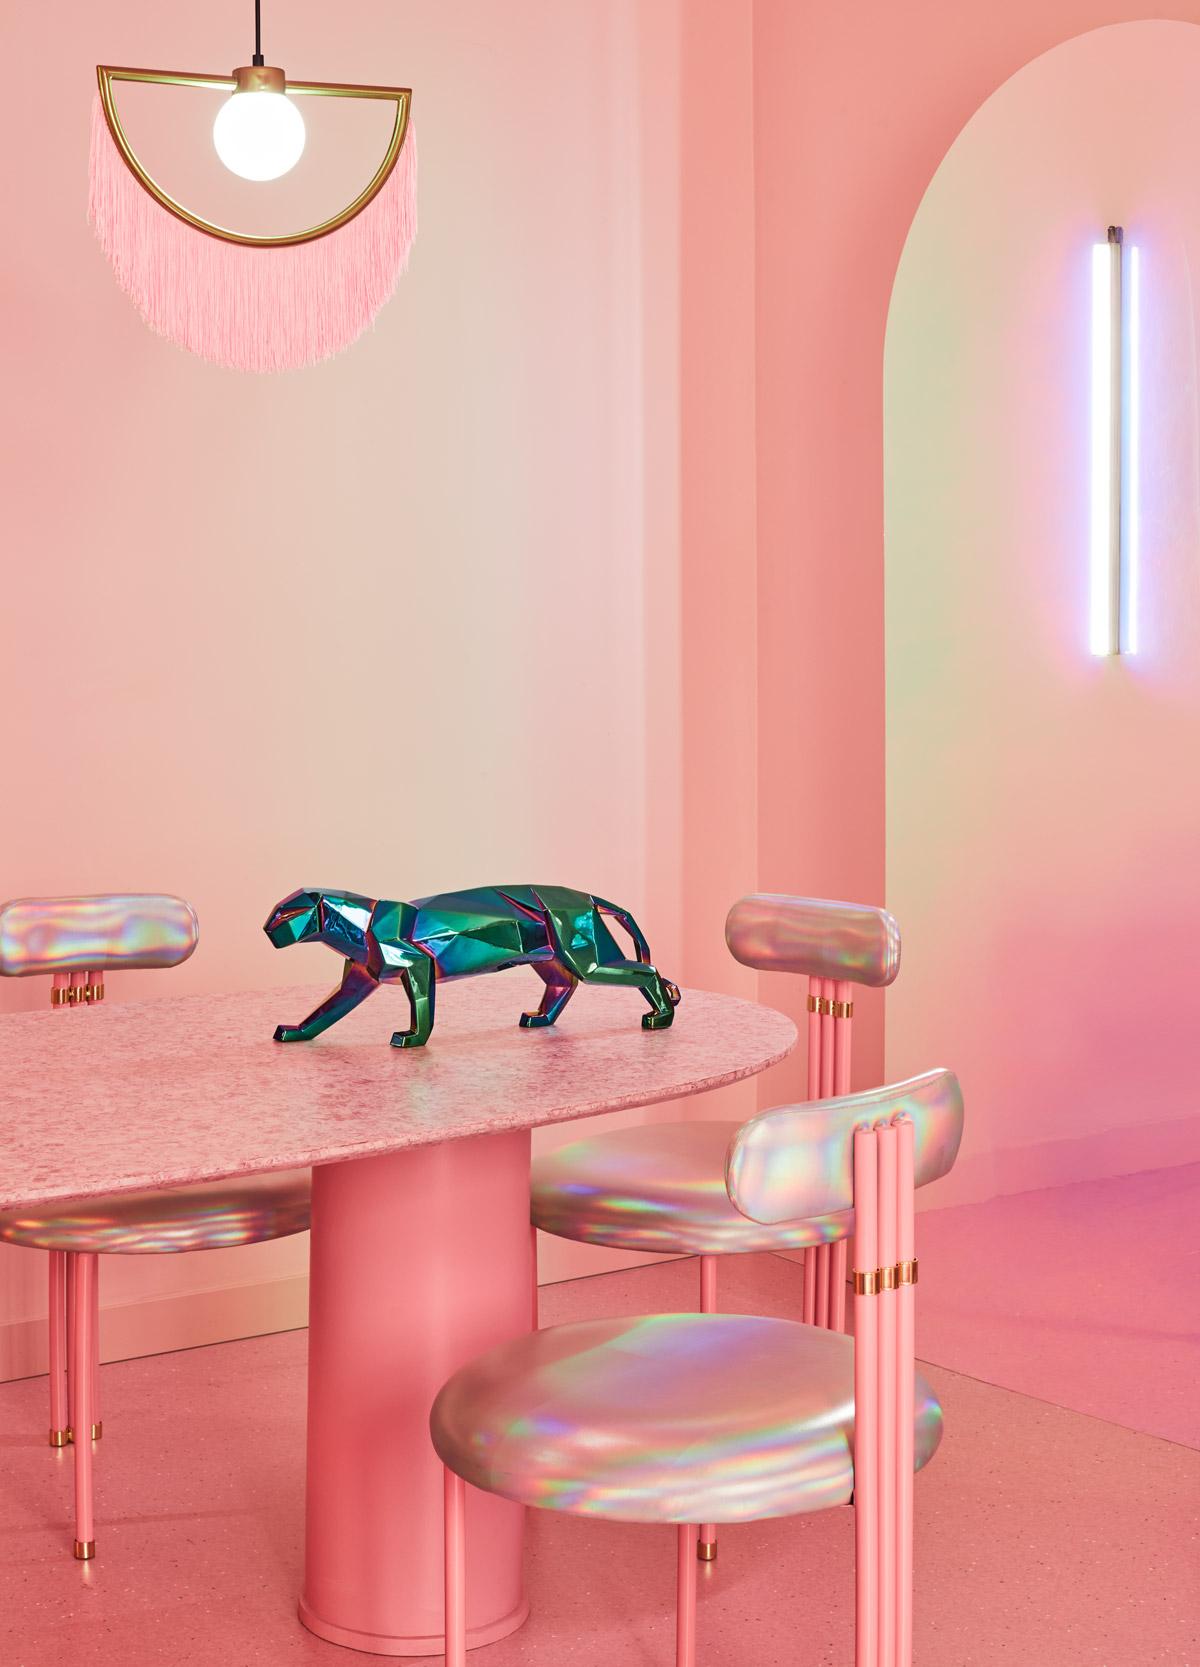 Porcelain sculpture depicting a panther from the Origami collection. In their constant search for new colors and decorative options, Lladró artists have surprised us once again with the use of iridescent metal. Iridescence, a phenomenon by which